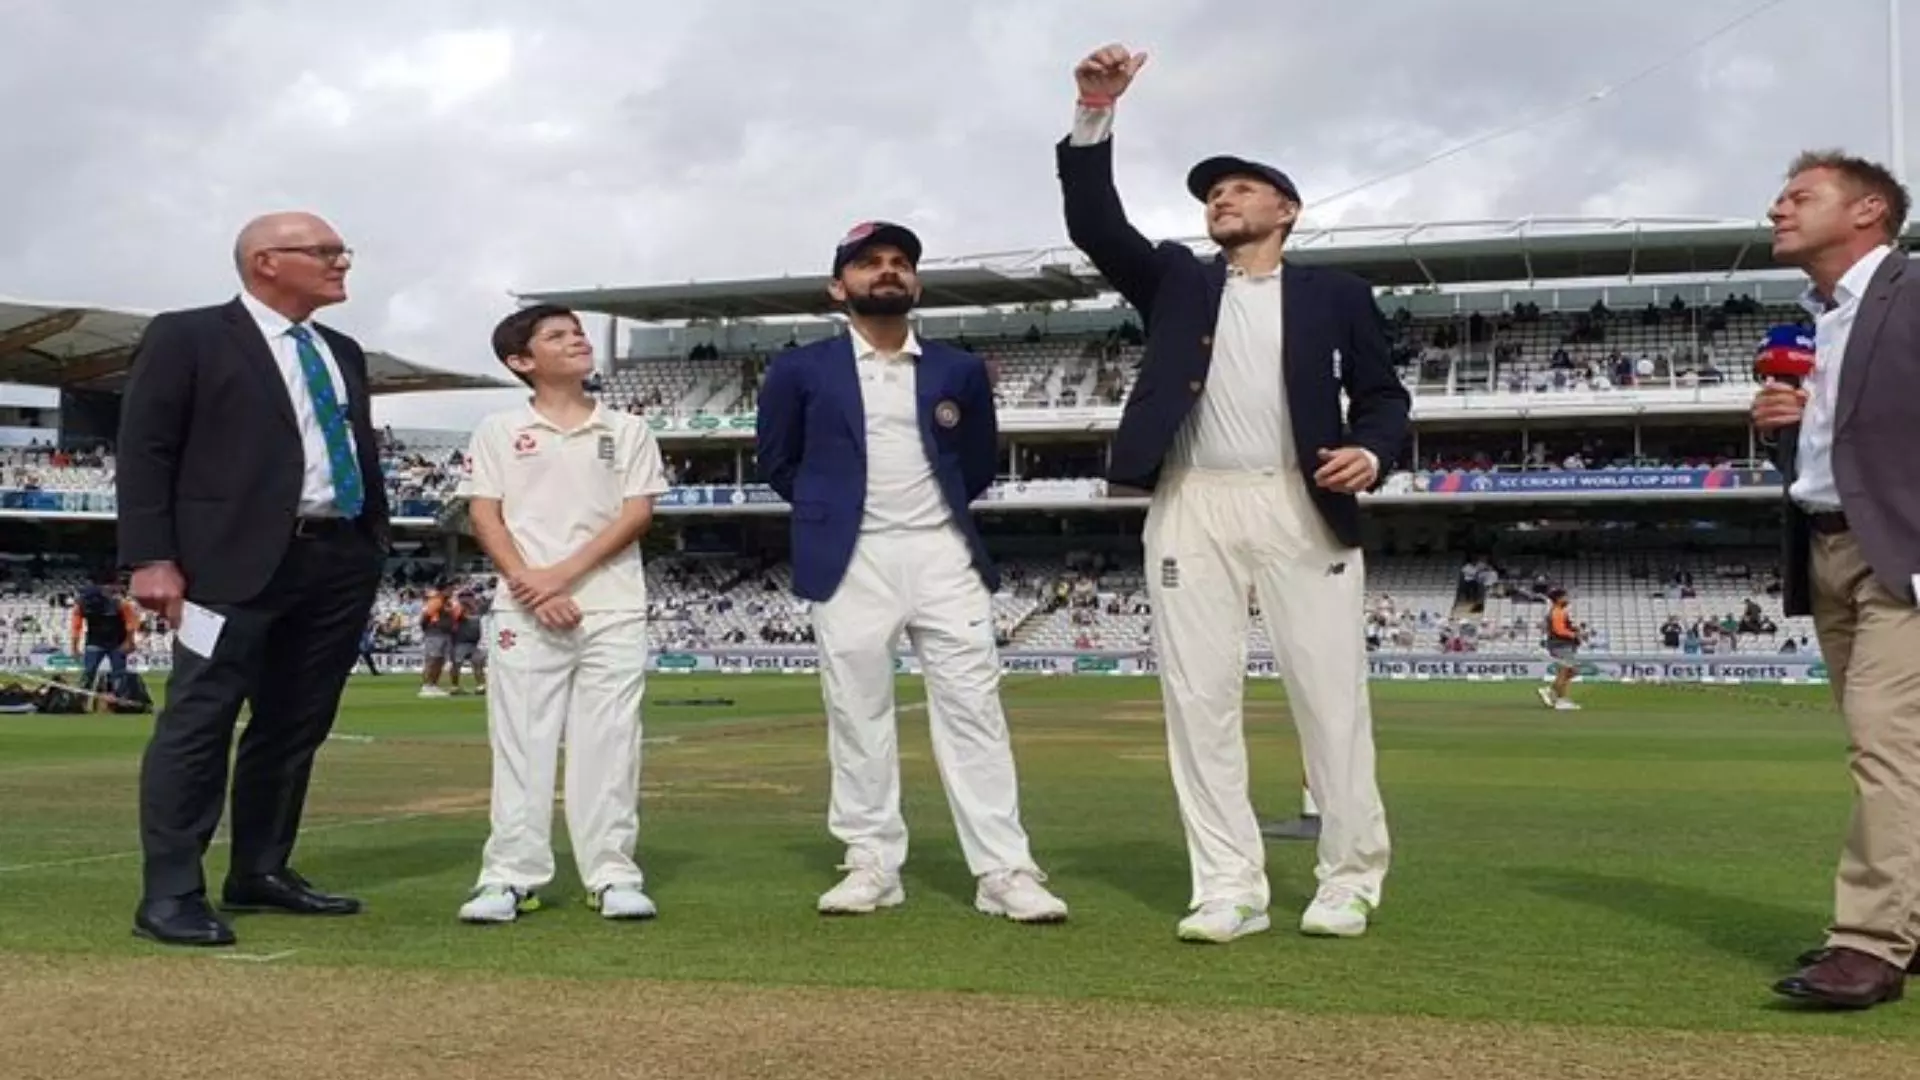 England Won The Toss Elected to Field First in India vs England Second Test